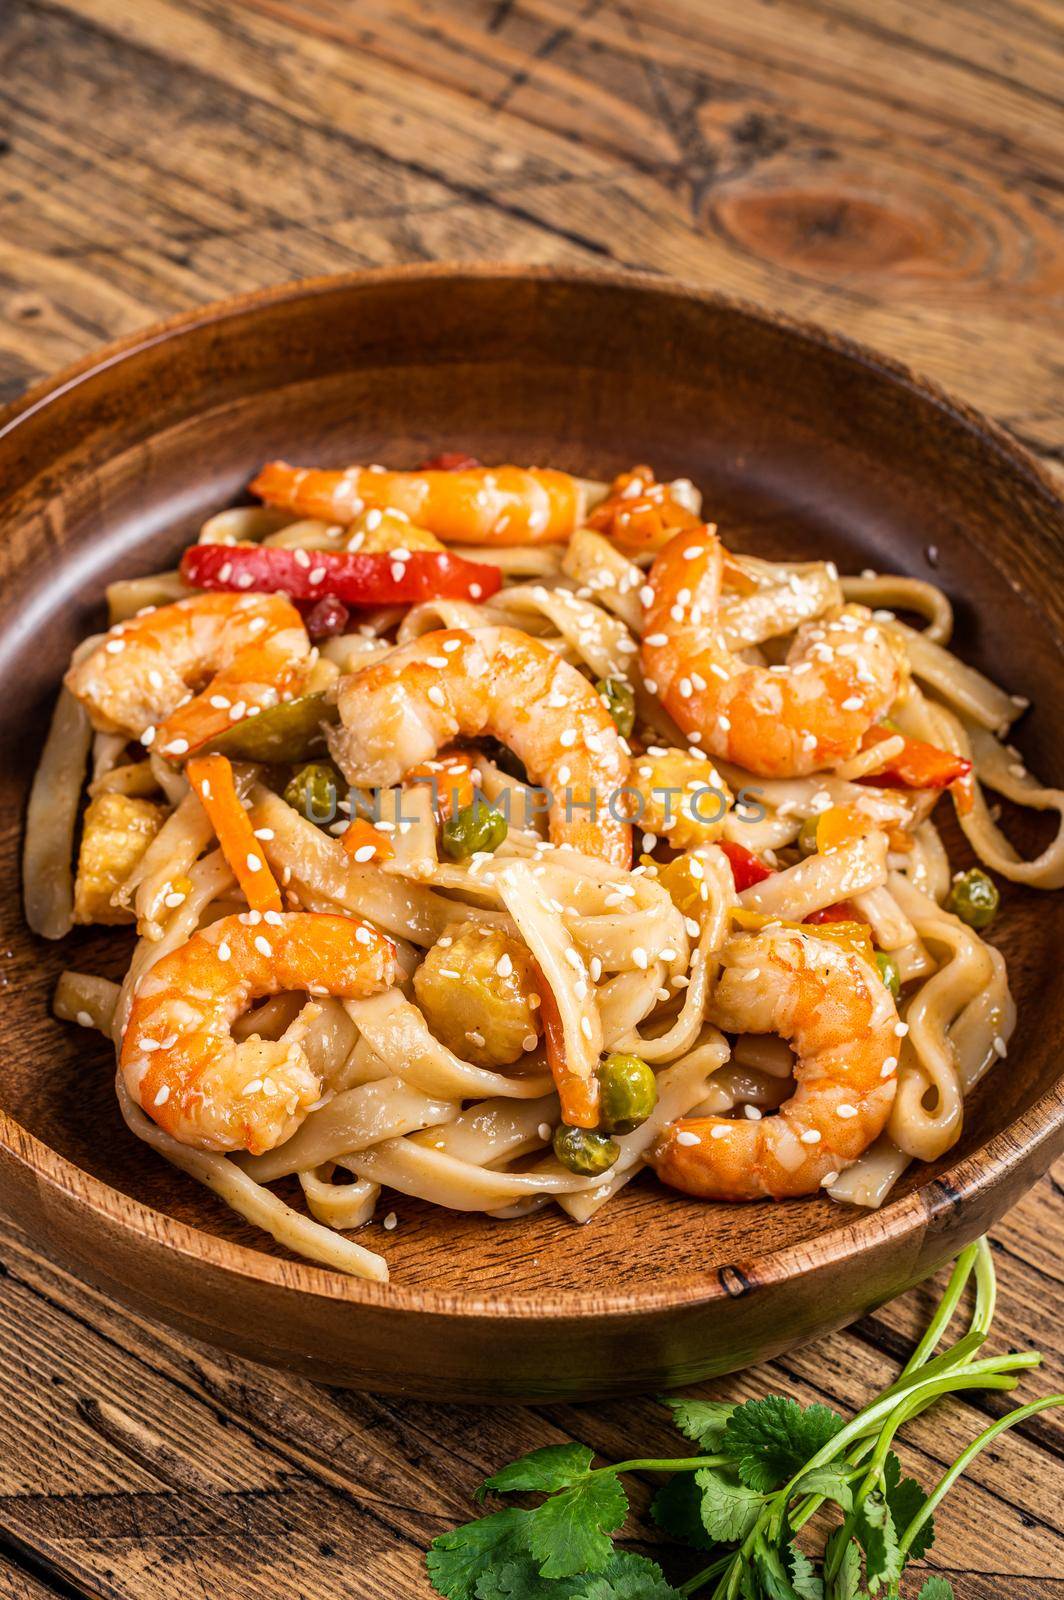 Udon stir-fry noodles with shrimp prawns in a wooden bowl. wooden background. Top view.